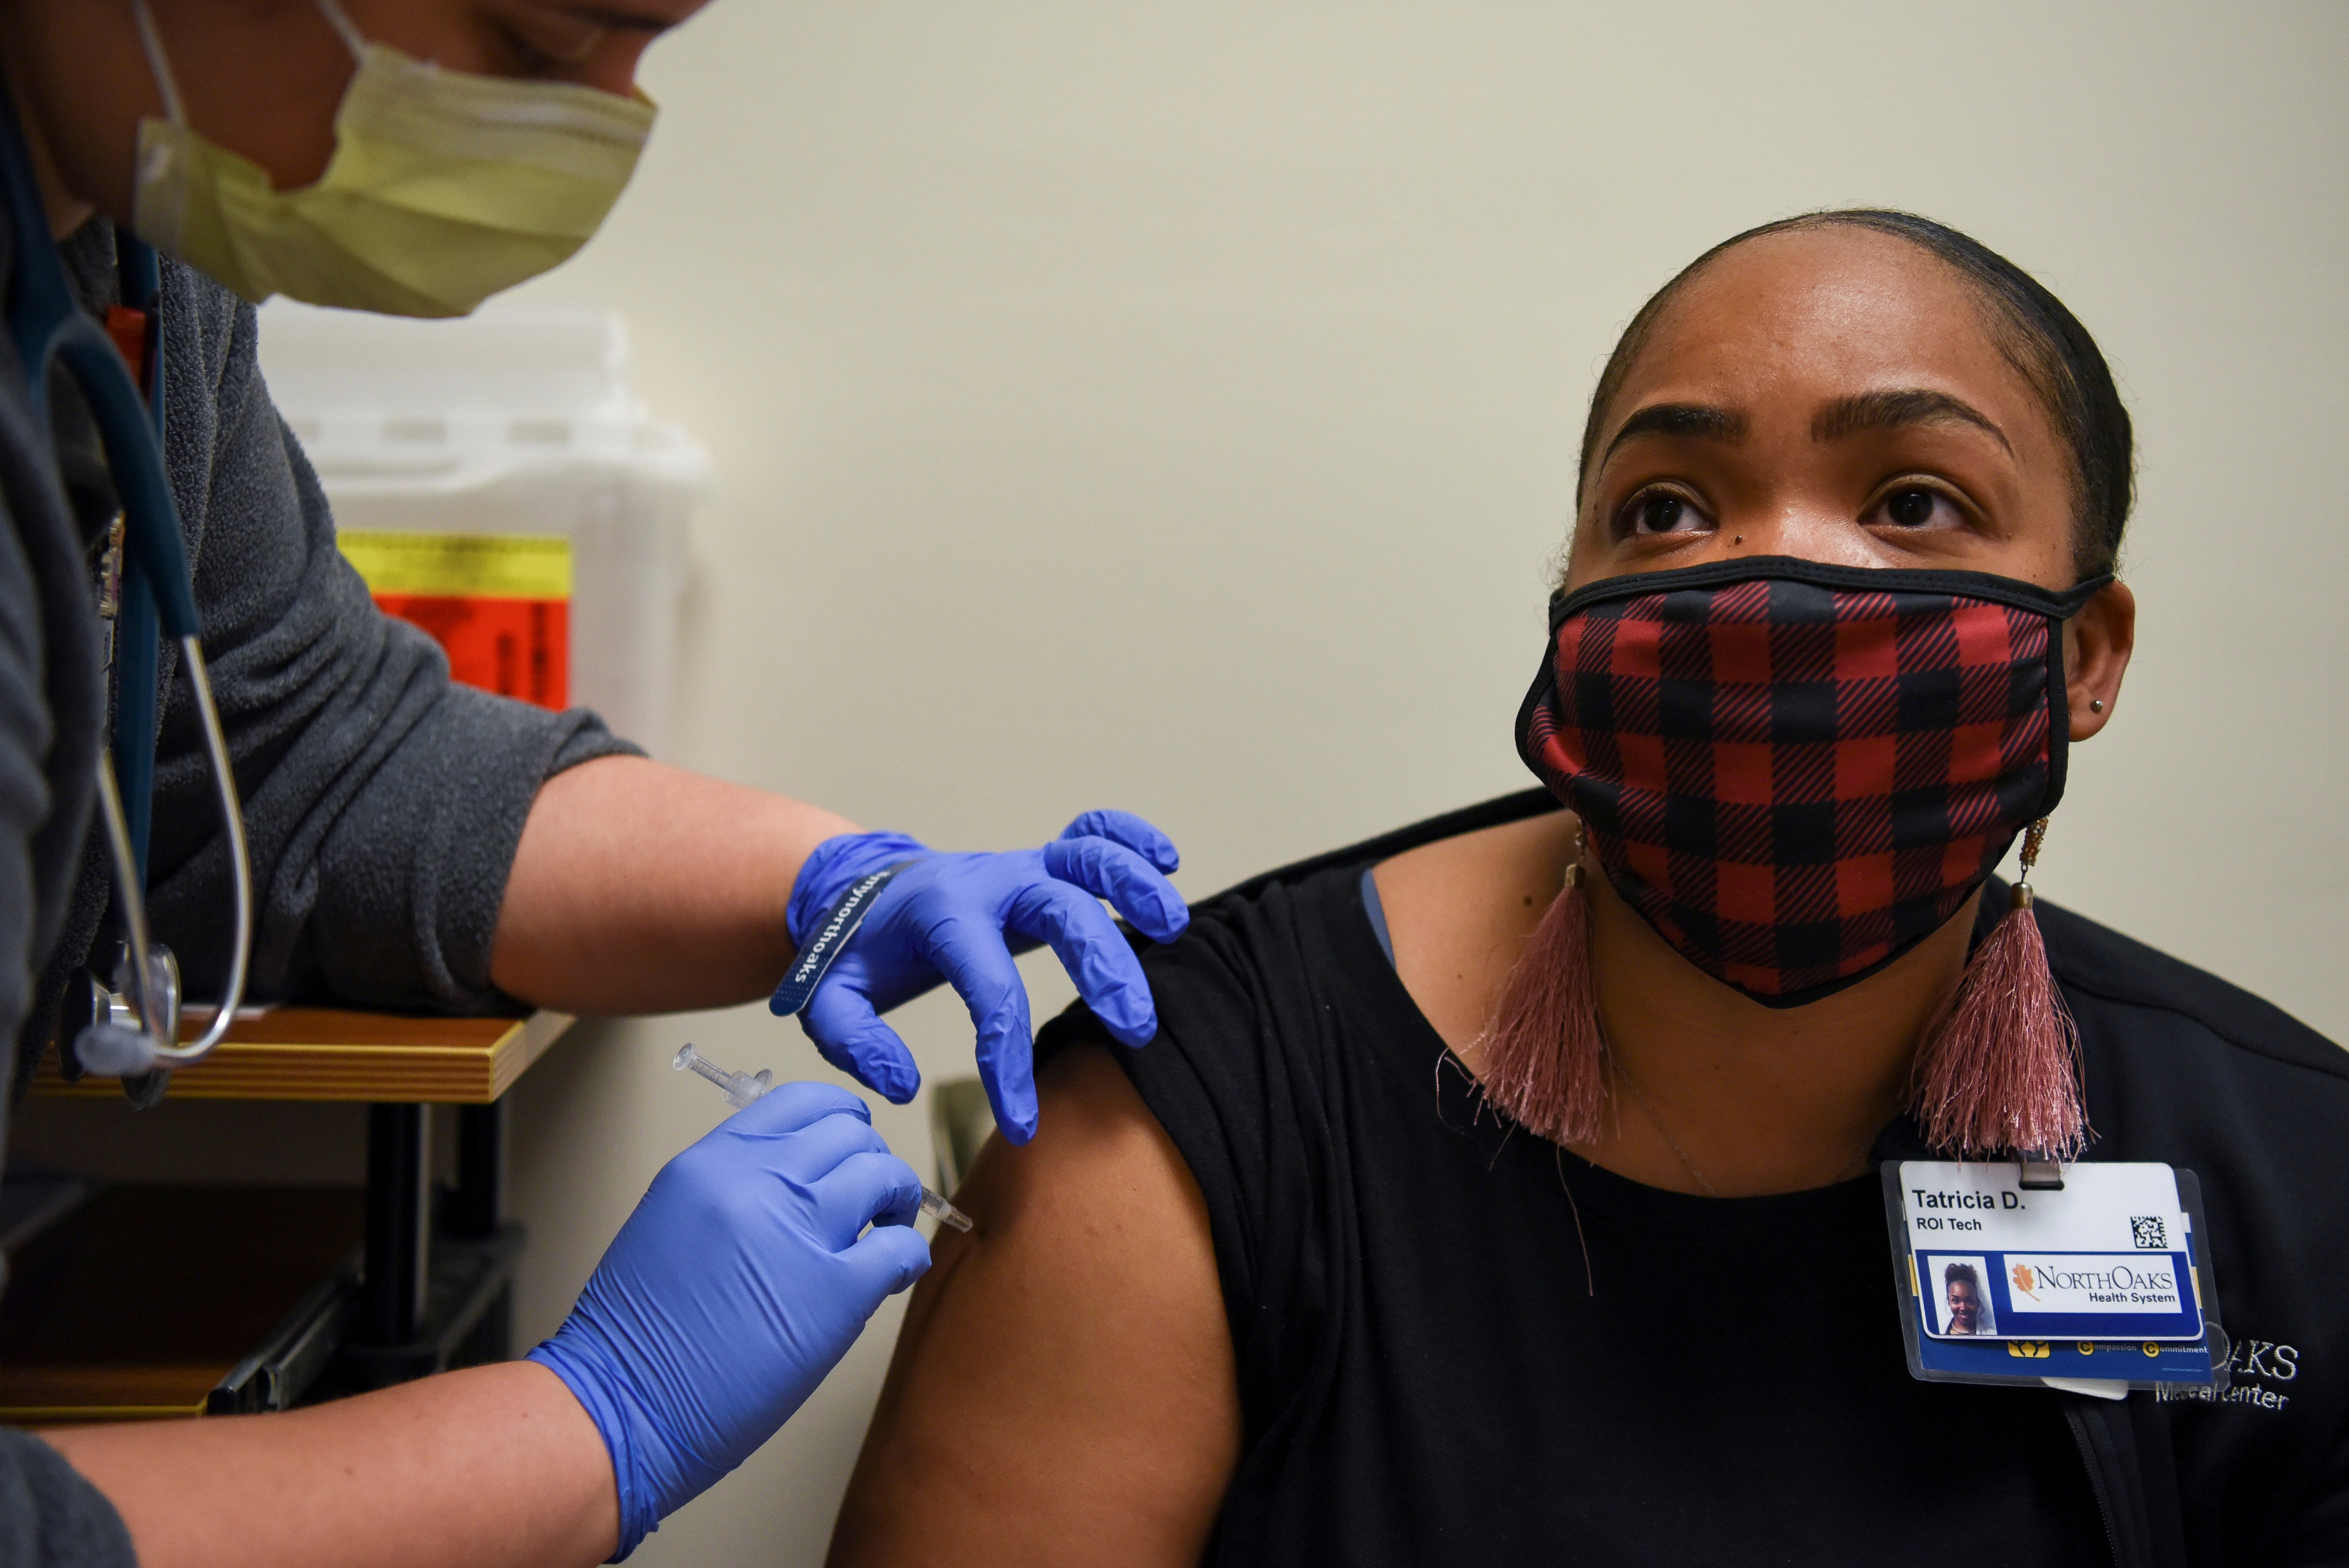 A woman receives a COVID-19 vaccine at North Oaks Medical Center in Hammond, La., Aug. 5, 2021. Results of a new poll released Aug. 5 showed many parents are hesitant about COVID-19 vaccines for their children. (CNS photo/Callaghan O'Hare, Reuters)